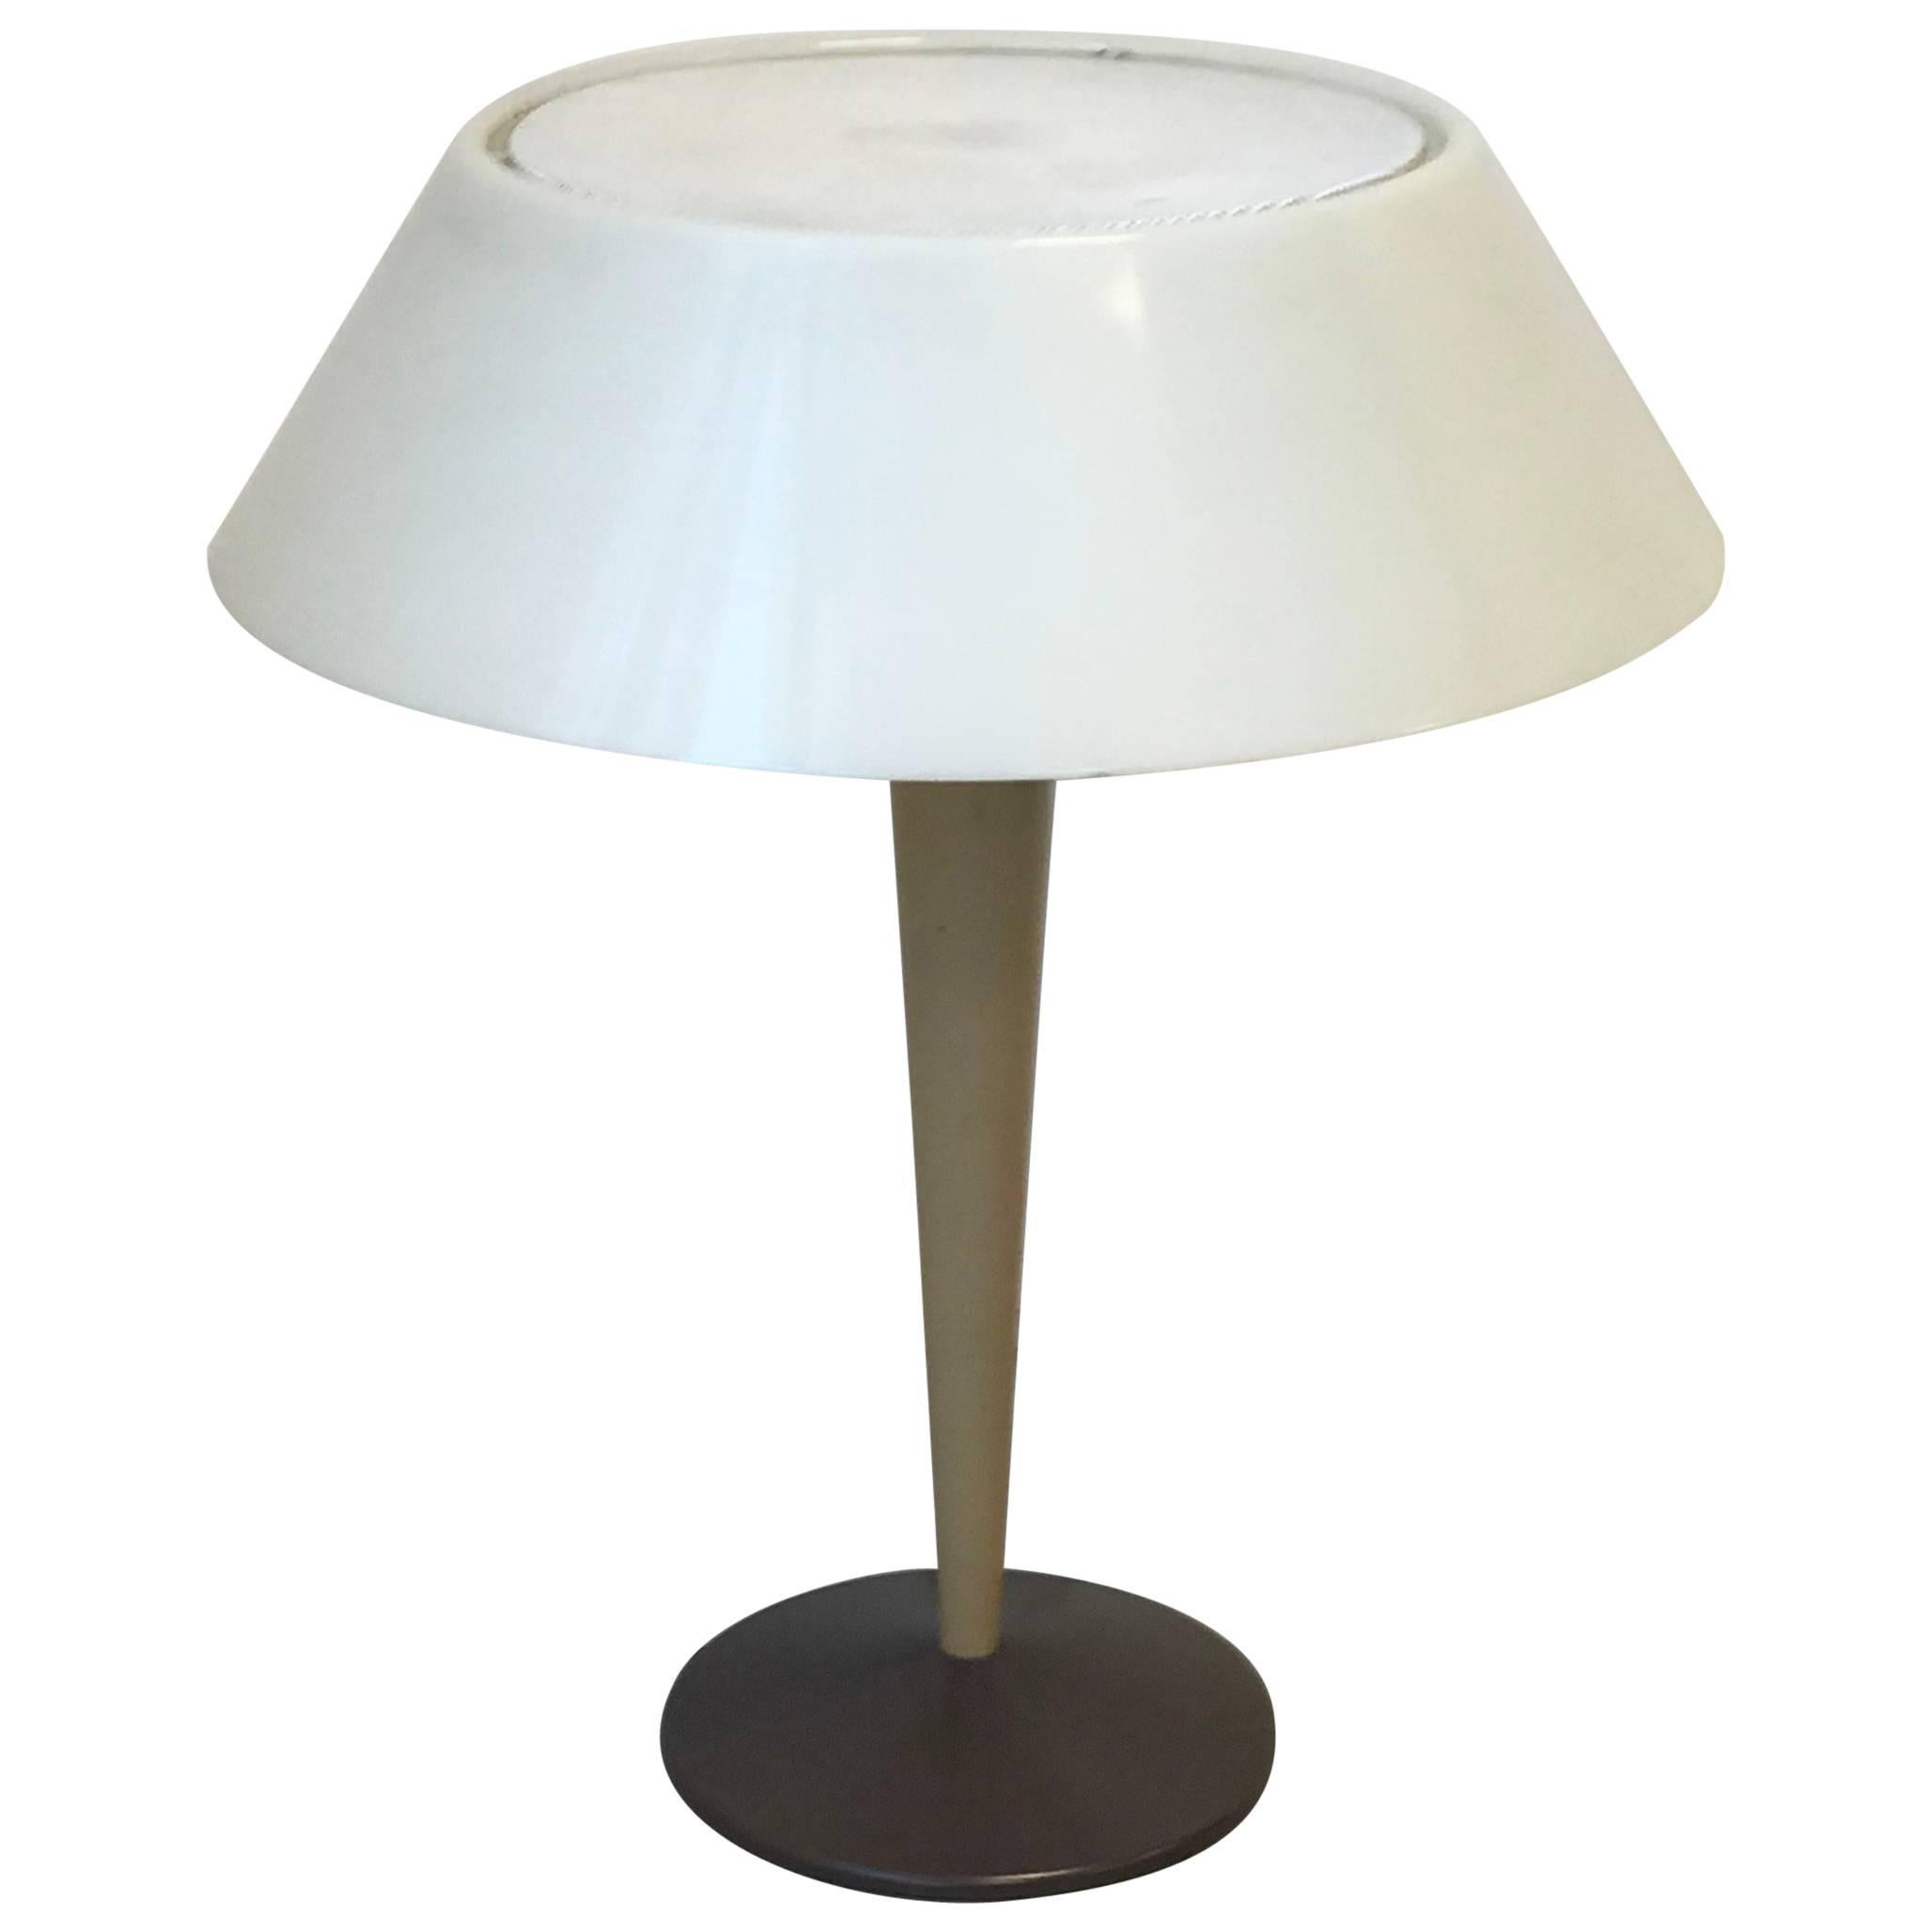 1960s White and Brown Gerald Thurston for Lightolier Table Lamp